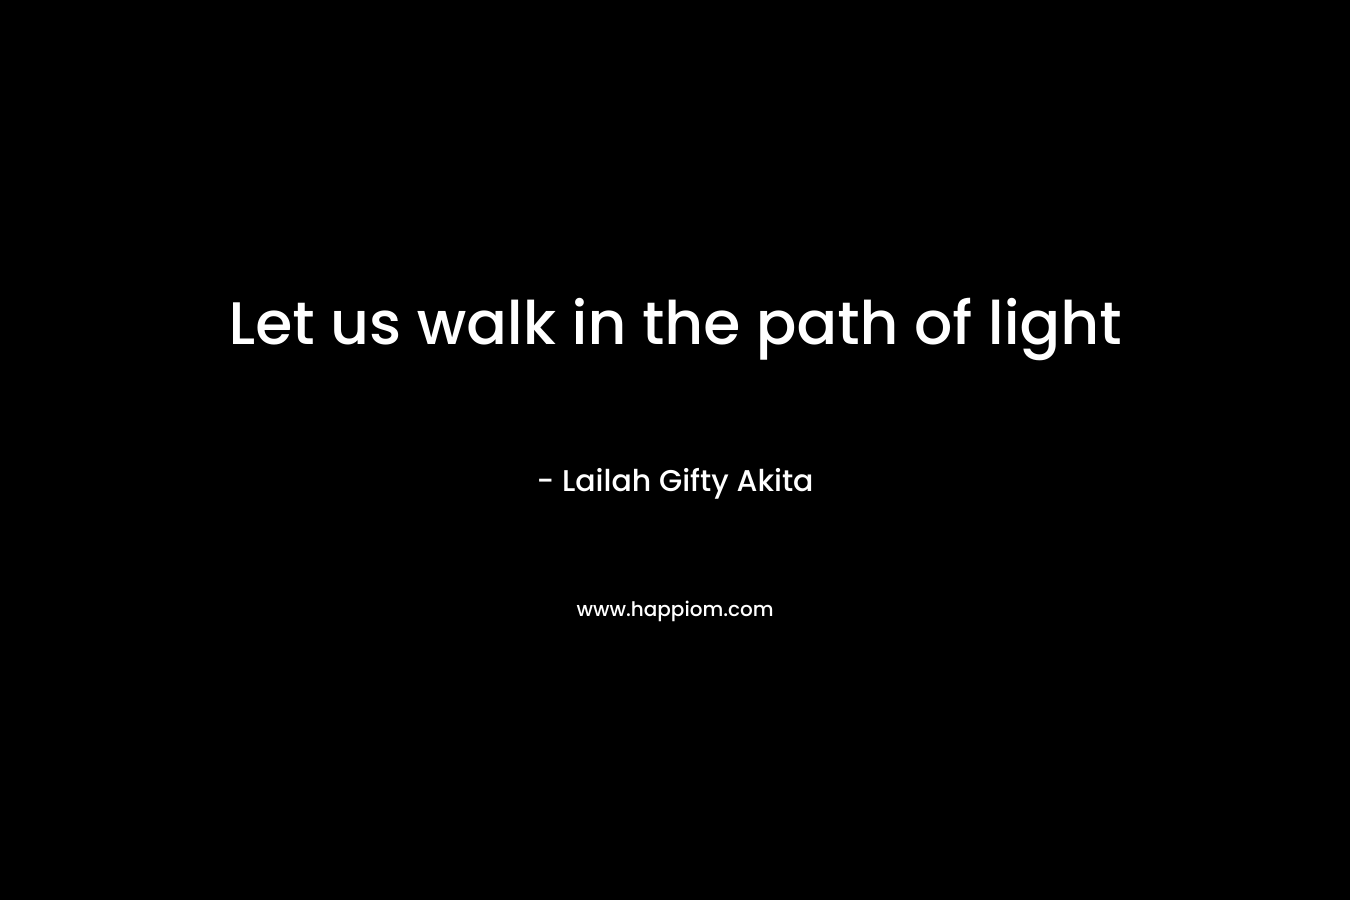 Let us walk in the path of light